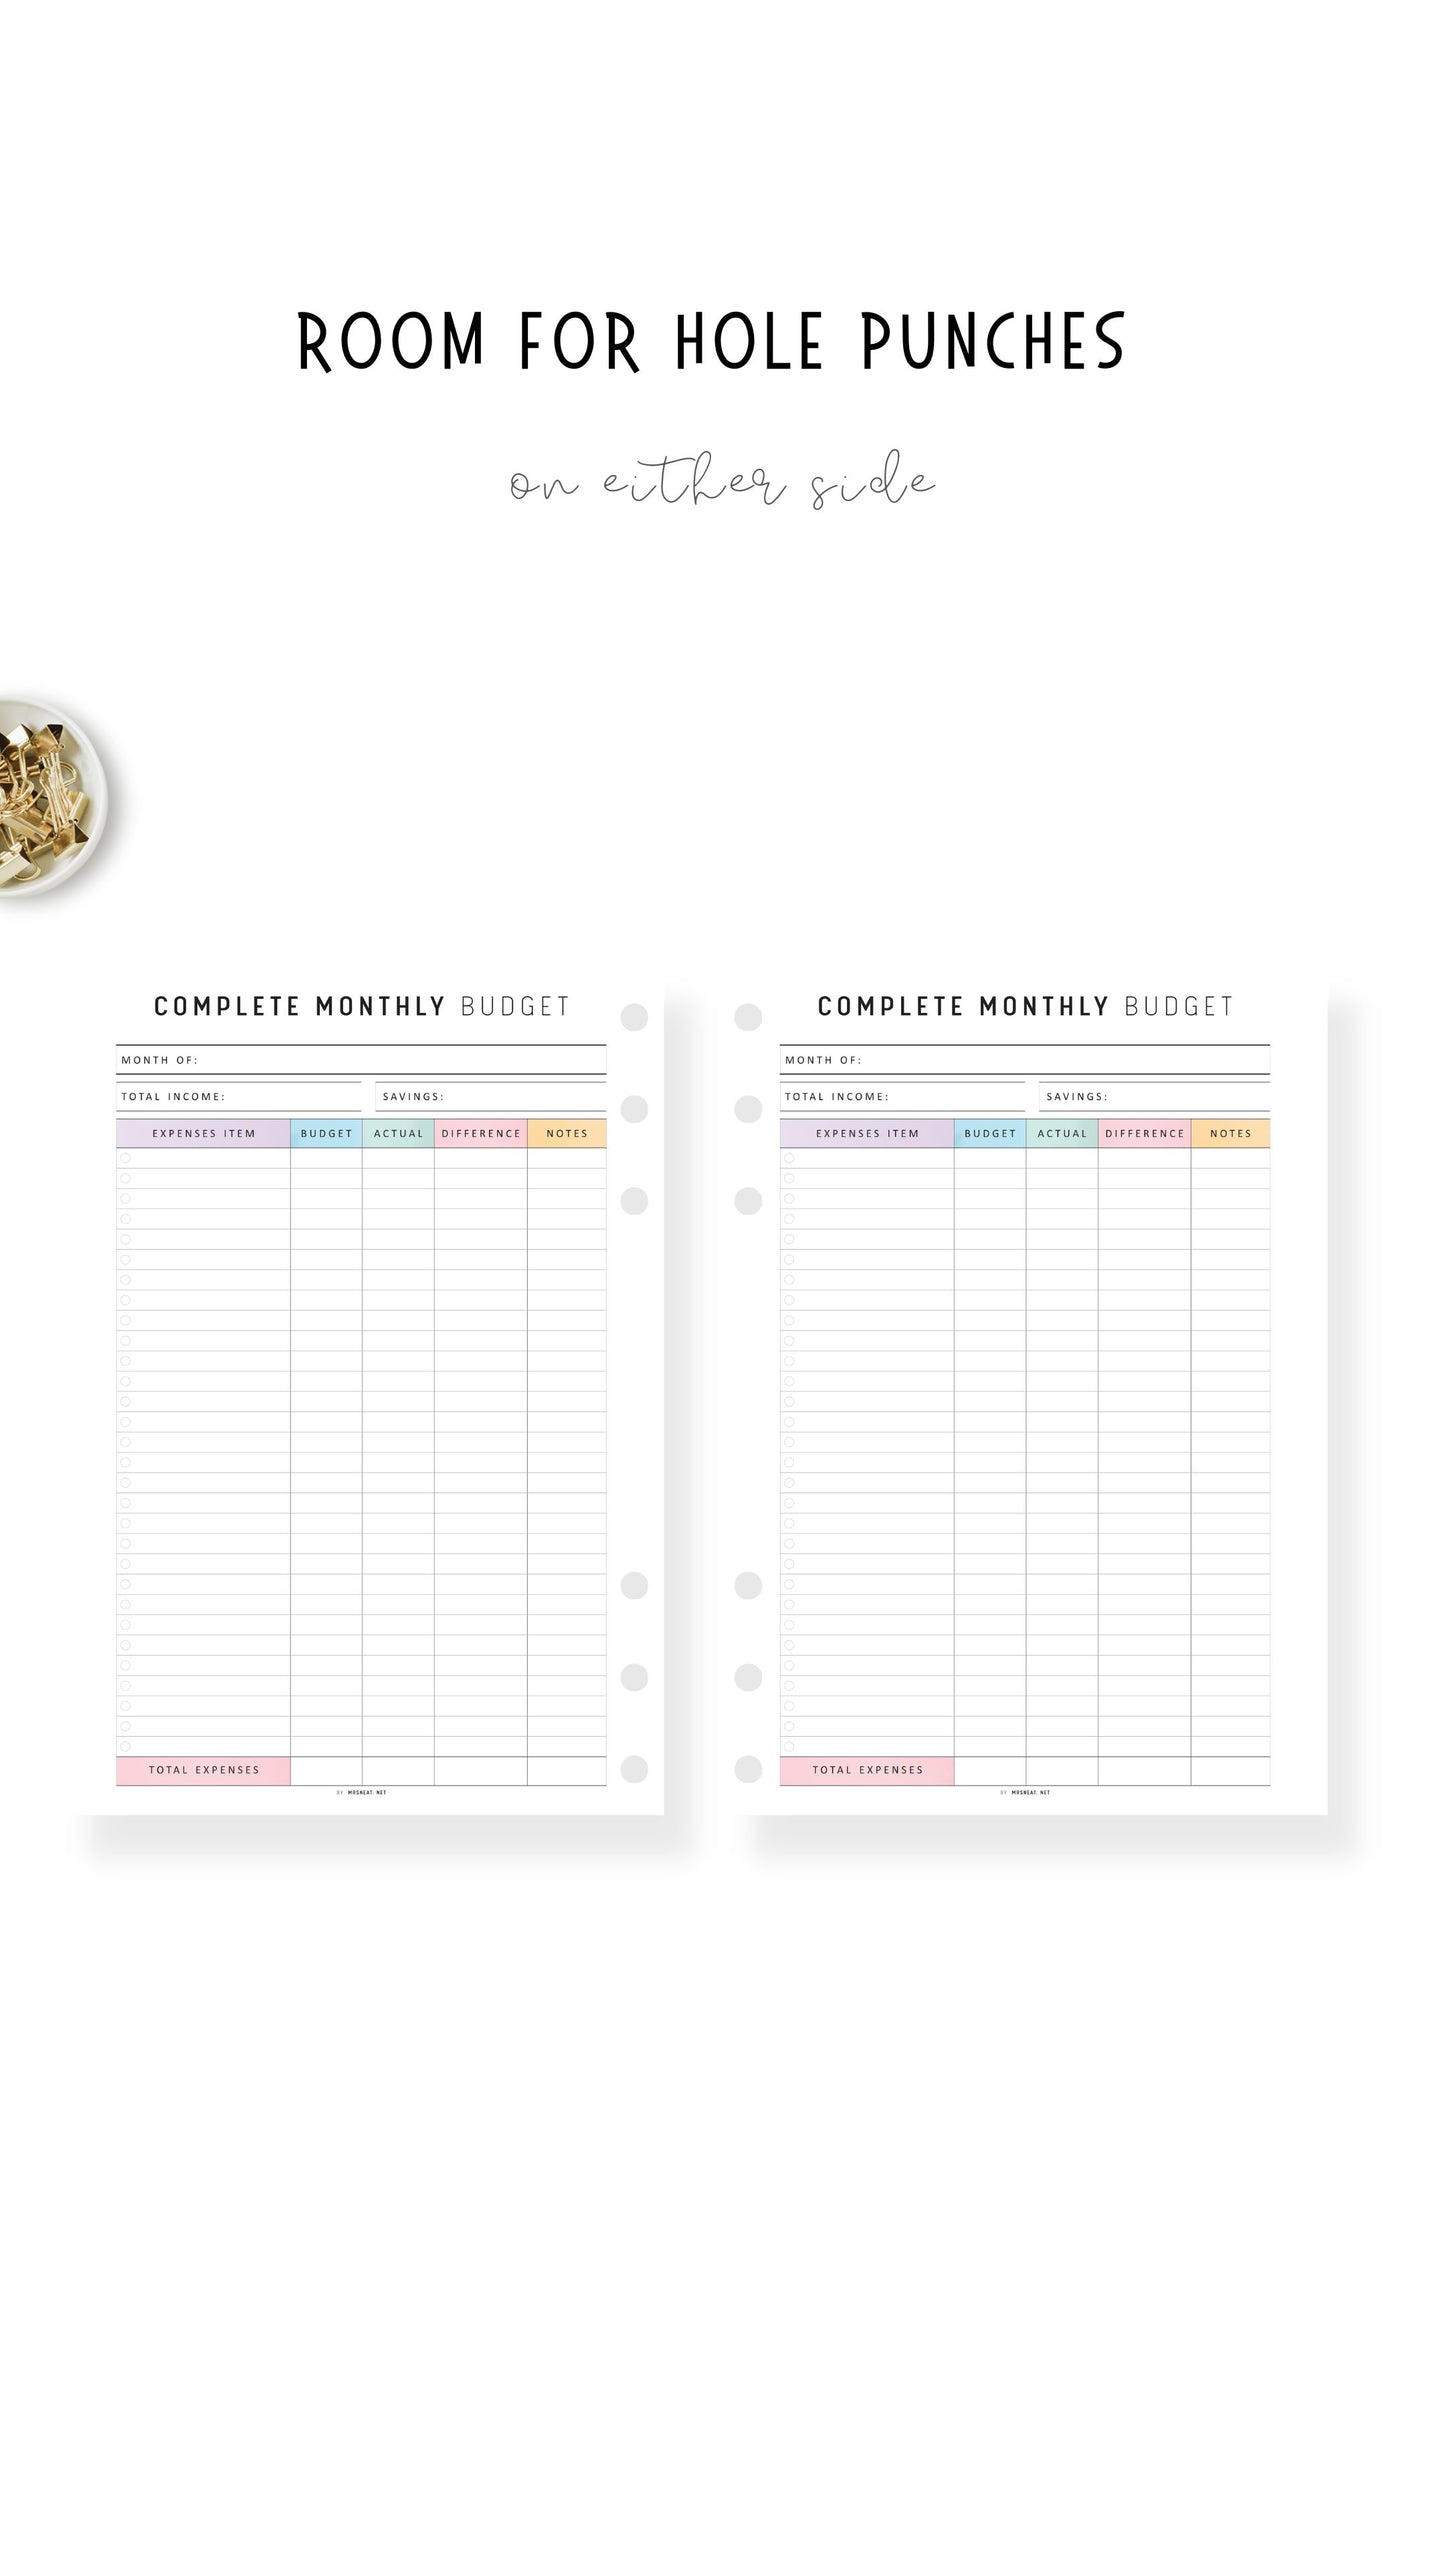 Complete Monthly Budget Template Printable, The Ultimate Monthly Budget Planner, A4, A5, Letter, Half Letter, Colorful Planner, Digital Planner, 2 color options, 2 versions